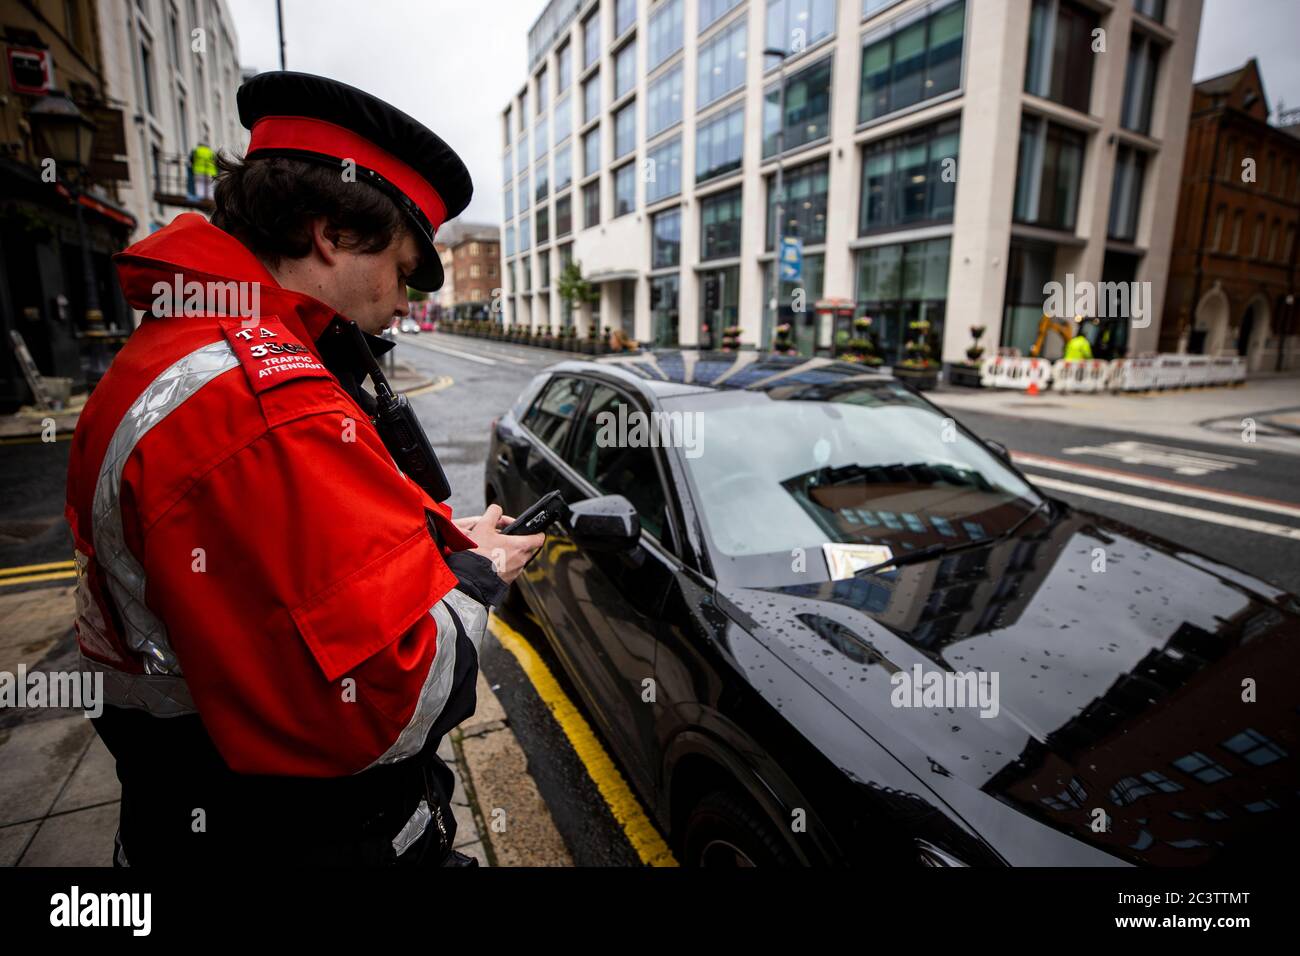 A traffic warden places a warning ticket on a vehicle in Belfast city centre as the lockdown suspension of on-street parking charges in Northern Ireland is set to be lifted. Wardens will issue 'warnings' to prepare the public for the return of charges and fines on June 29. Stock Photo